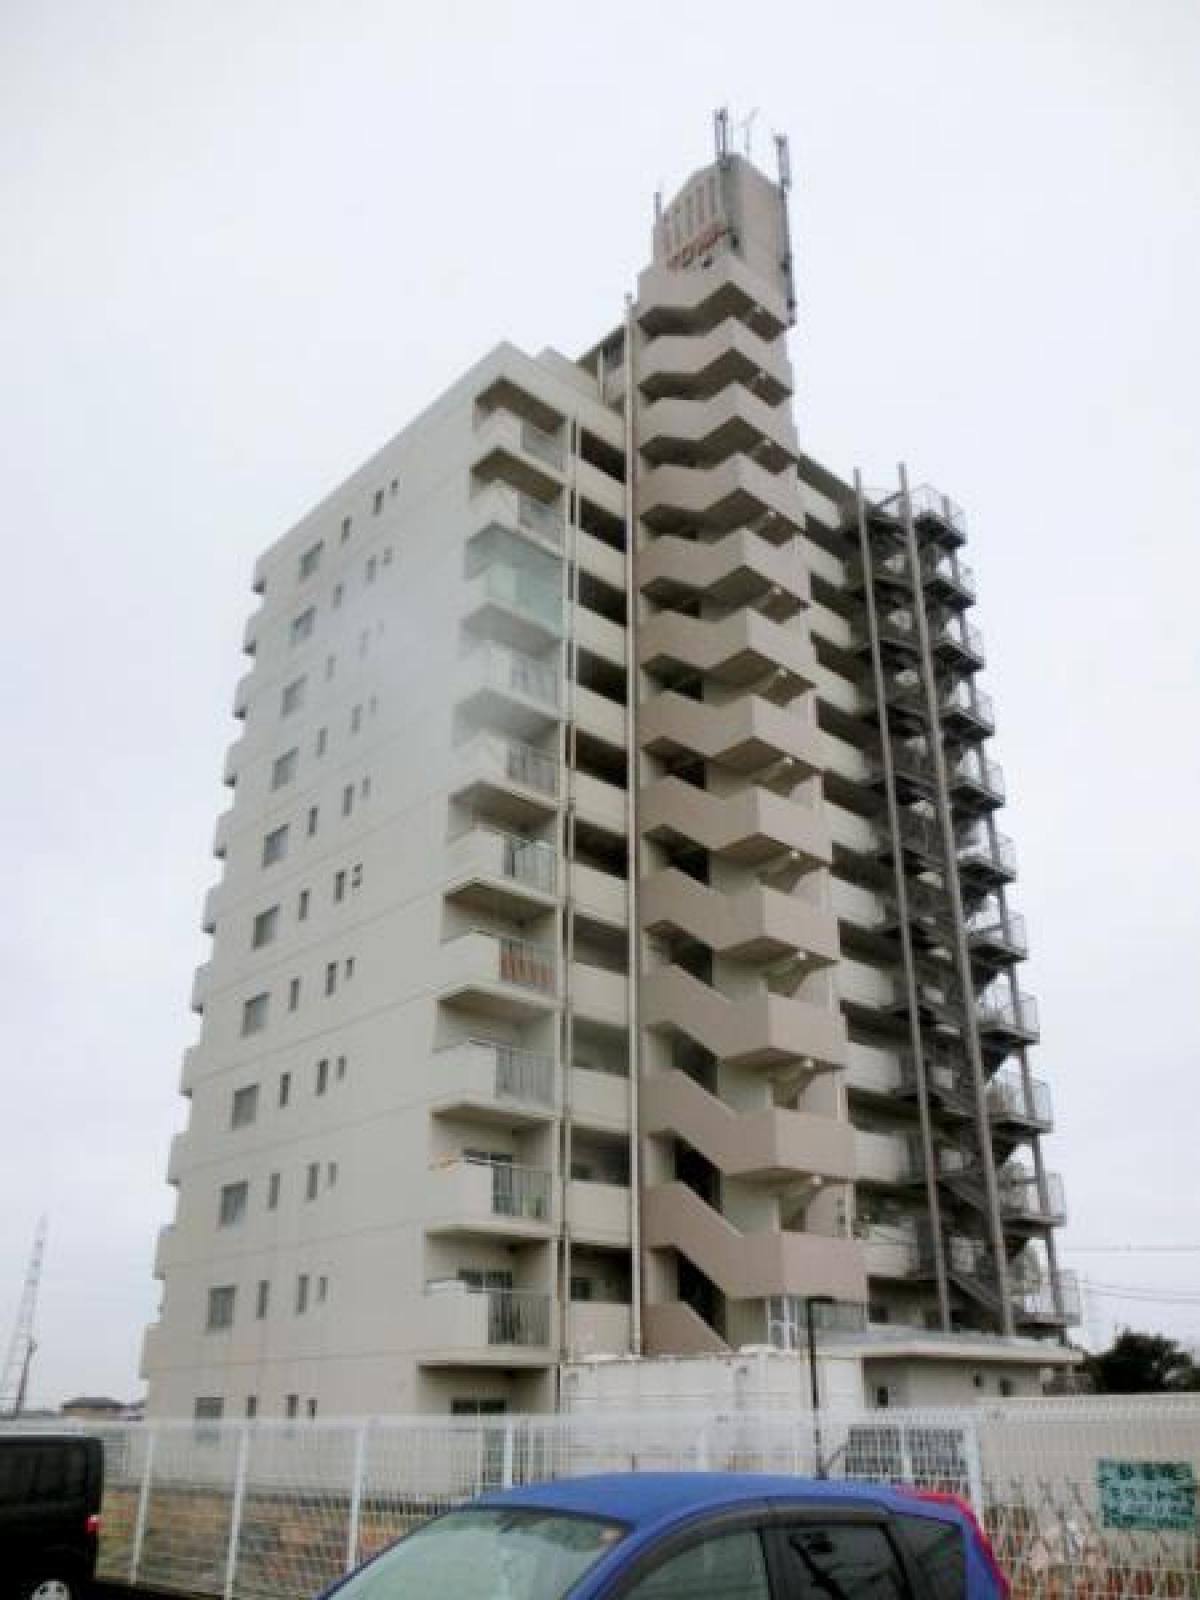 Picture of Apartment For Sale in Aisai Shi, Aichi, Japan